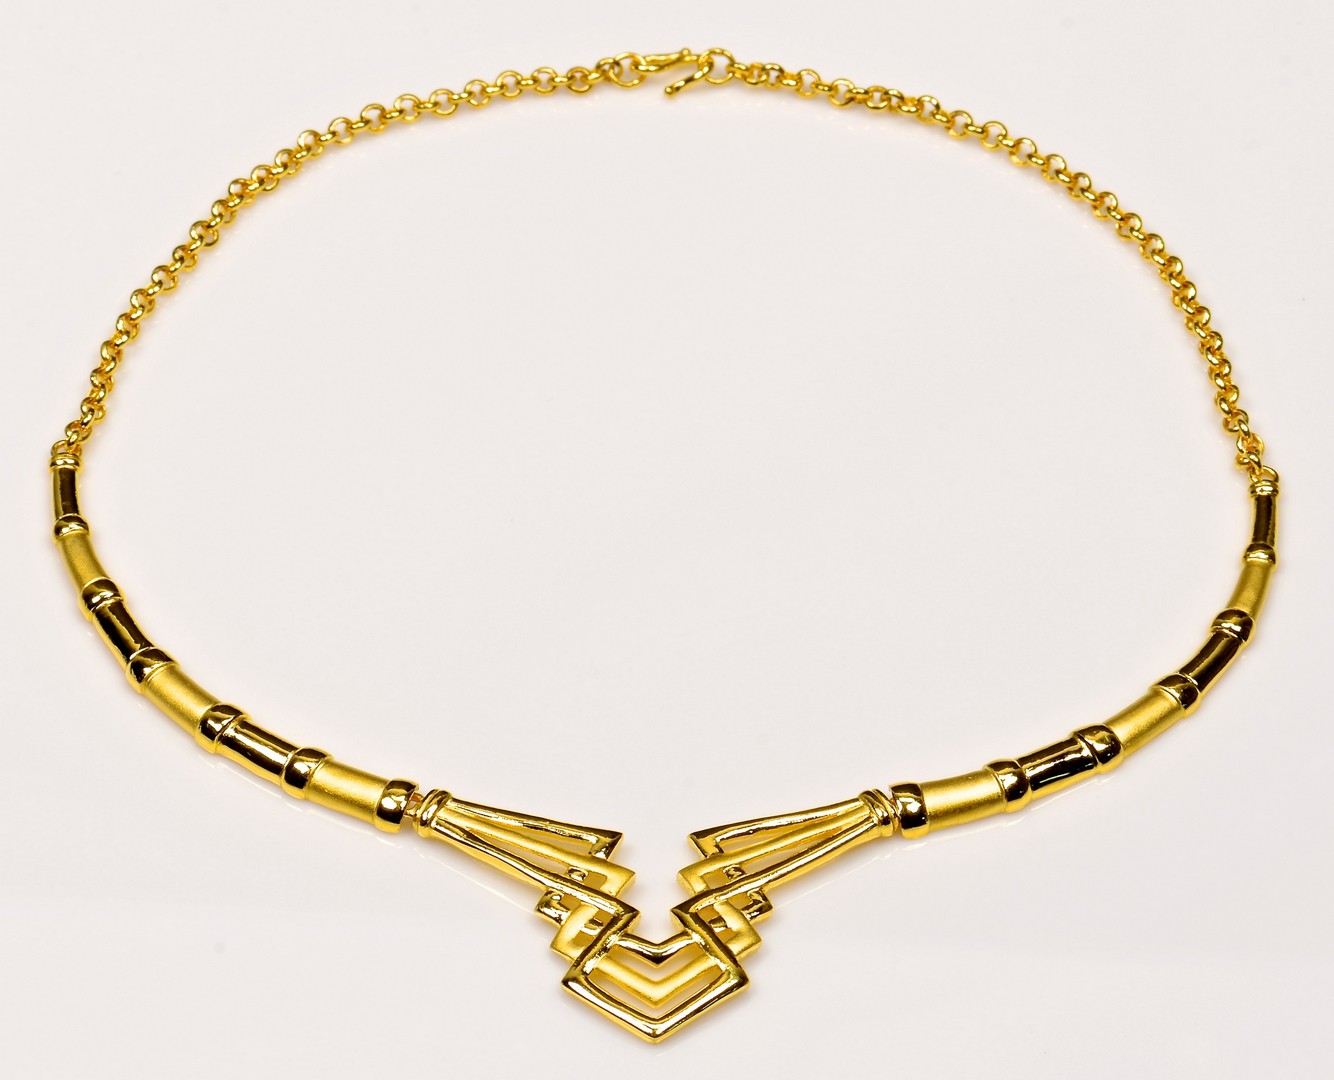 Lot 74: Chinese Modern 24K Gold Necklace